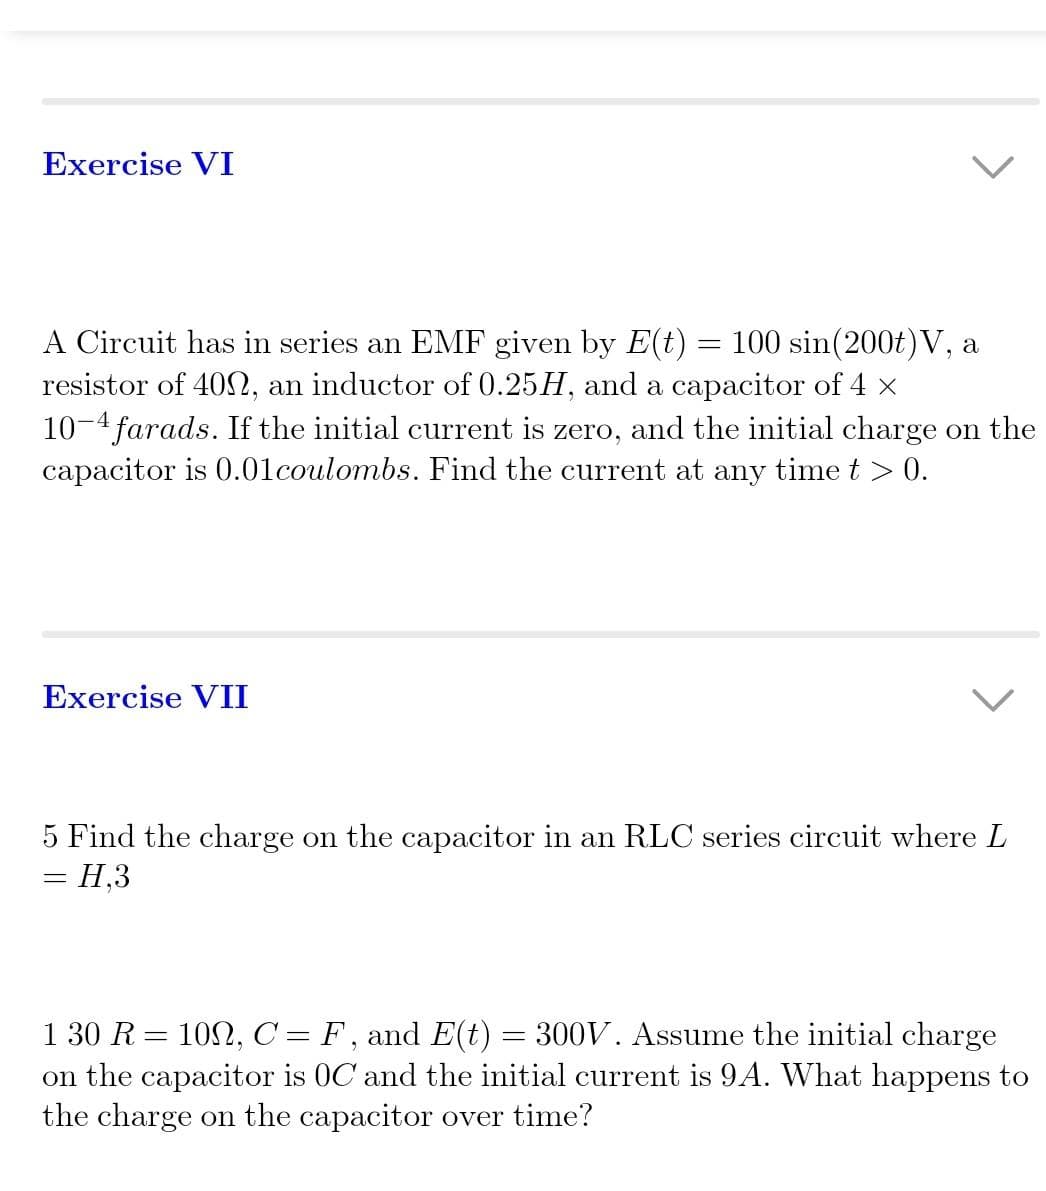 Exercise VI
A Circuit has in series an EMF given by E(t) = 100 sin(200t) V, a
resistor of 400, an inductor of 0.25H, and a capacitor of 4 ×
10-4 farads. If the initial current is zero, and the initial charge on the
capacitor is 0.01 coulombs. Find the current at any time t > 0.
Exercise VII
5 Find the charge on the capacitor in an RLC series circuit where L
= H,3
1 30 R =
100, C= F, and E(t)
300V. Assume the initial charge
on the capacitor is OC and the initial current is 9A. What happens to
the charge on the capacitor over time?
=